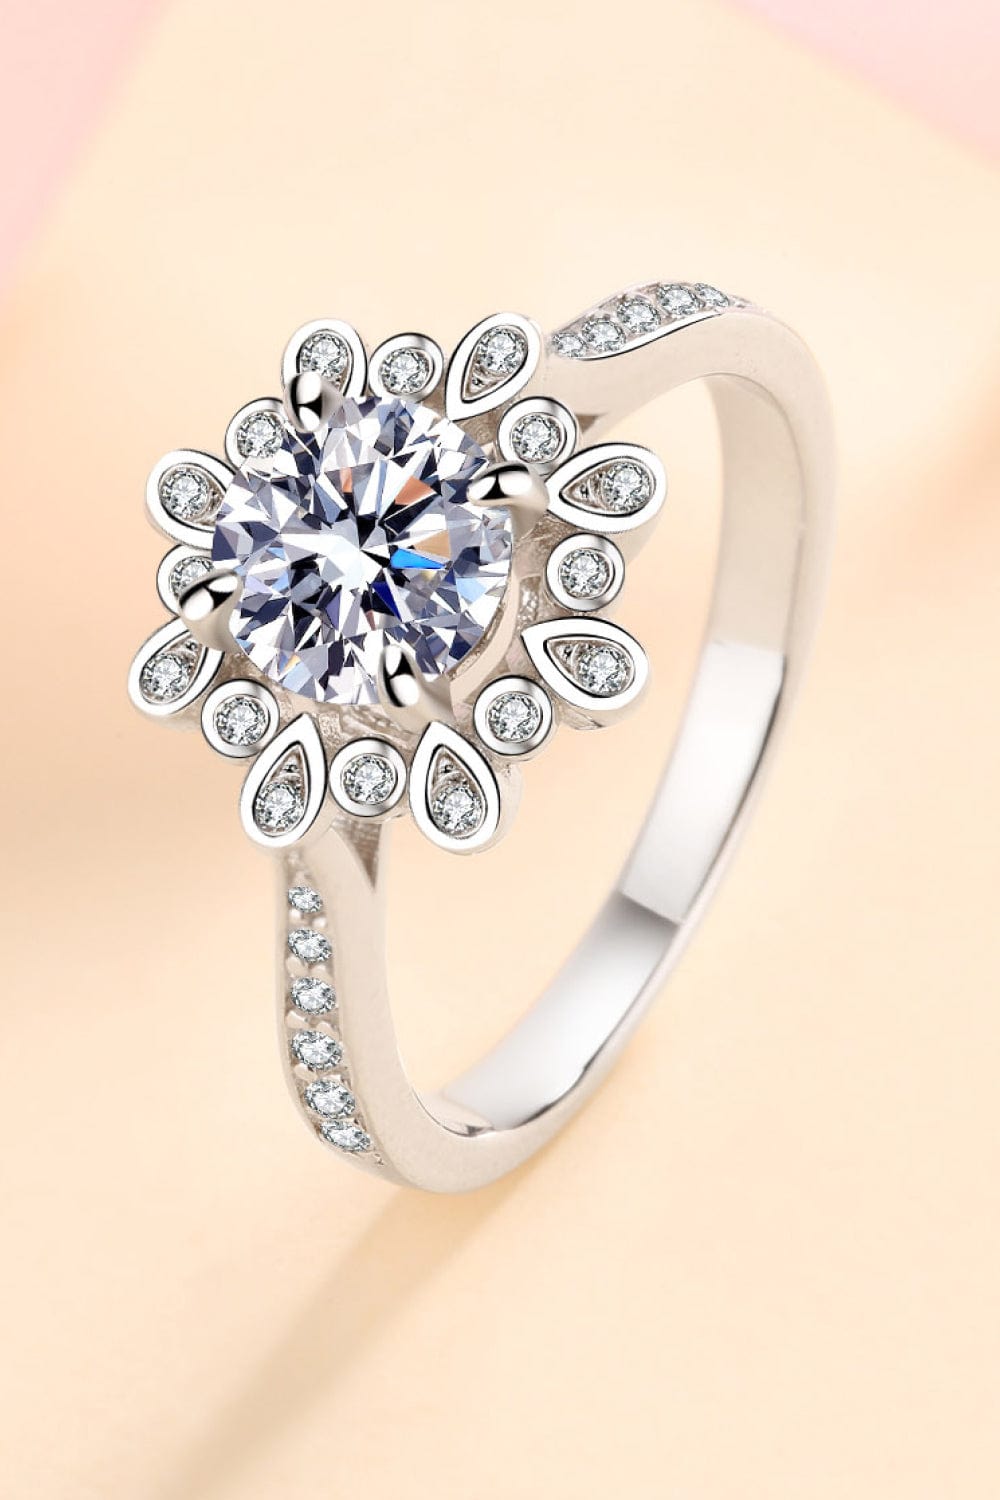 Can't Stop Your Shine 925 Sterling Silver Moissanite Ring - Body By J'ne